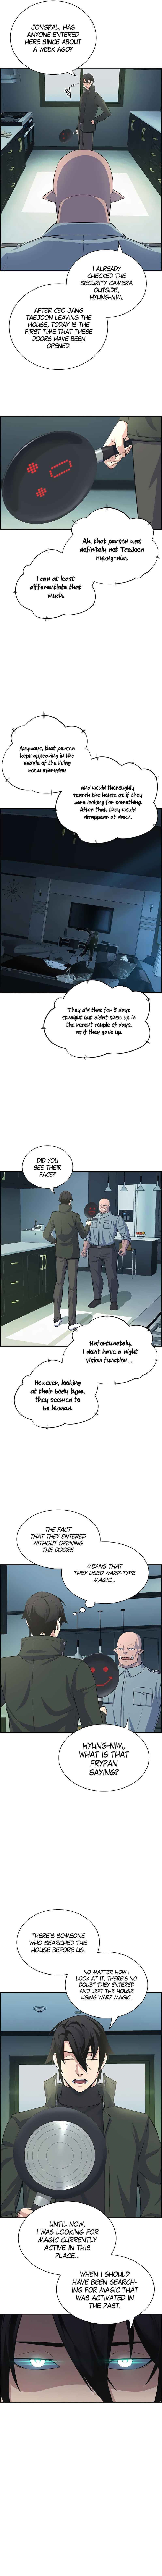 Foreigner on the Periphery Chapter 4 page 6